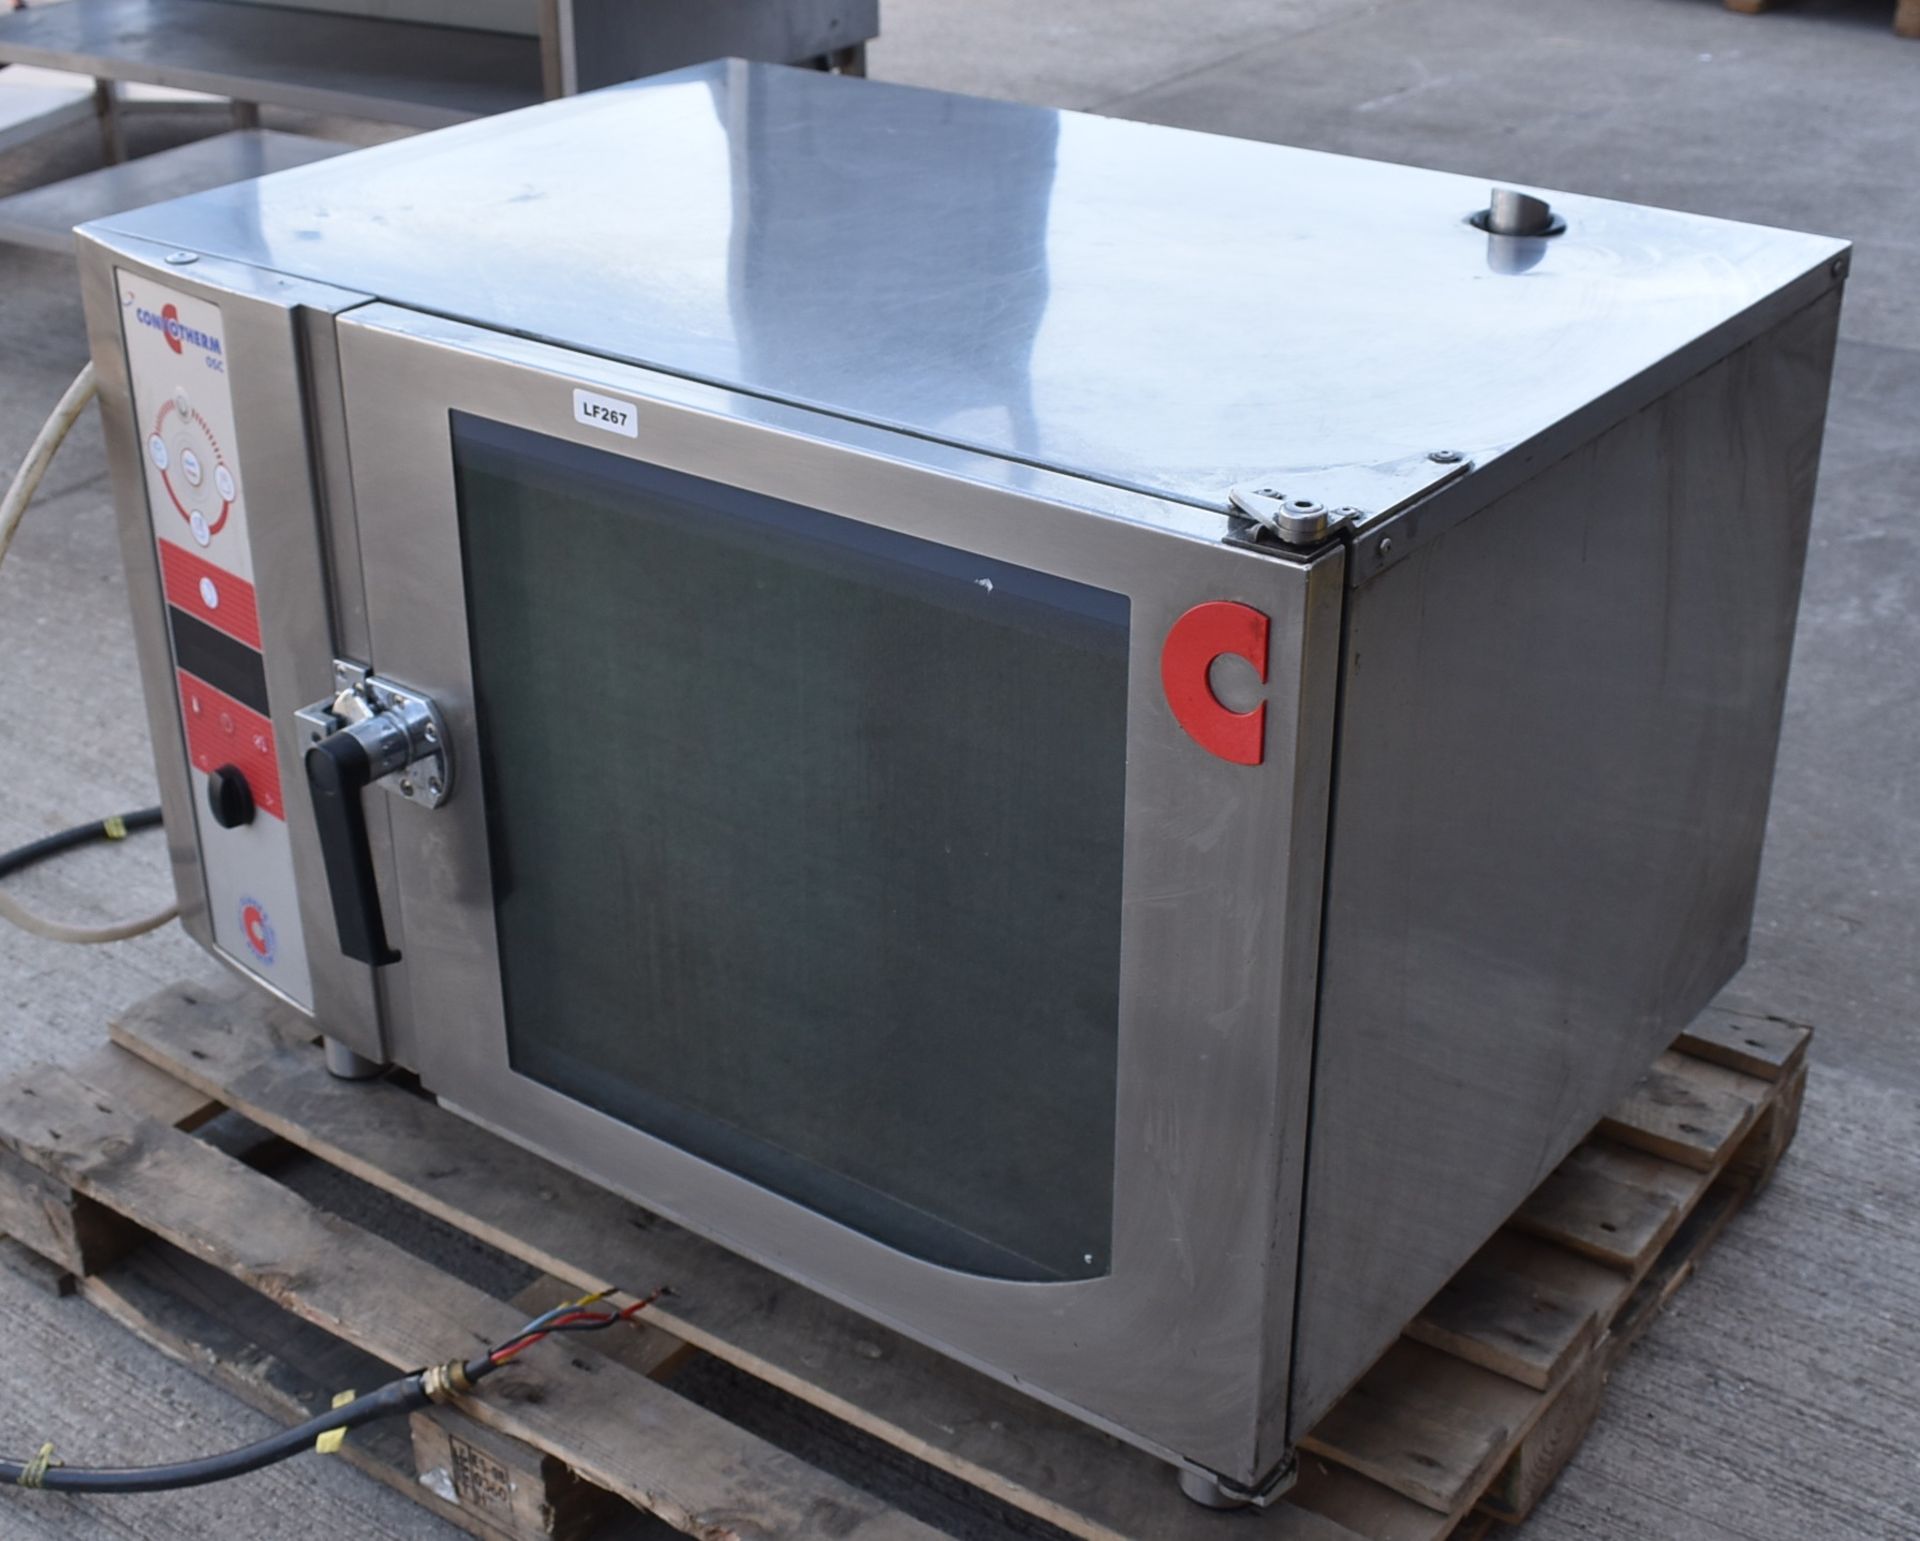 1 x Convotherm OSC Combi Oven - Model OSC 6.10 - 6 Grid Oven With Stainless Steel Finish - 3 Phase - Image 9 of 14